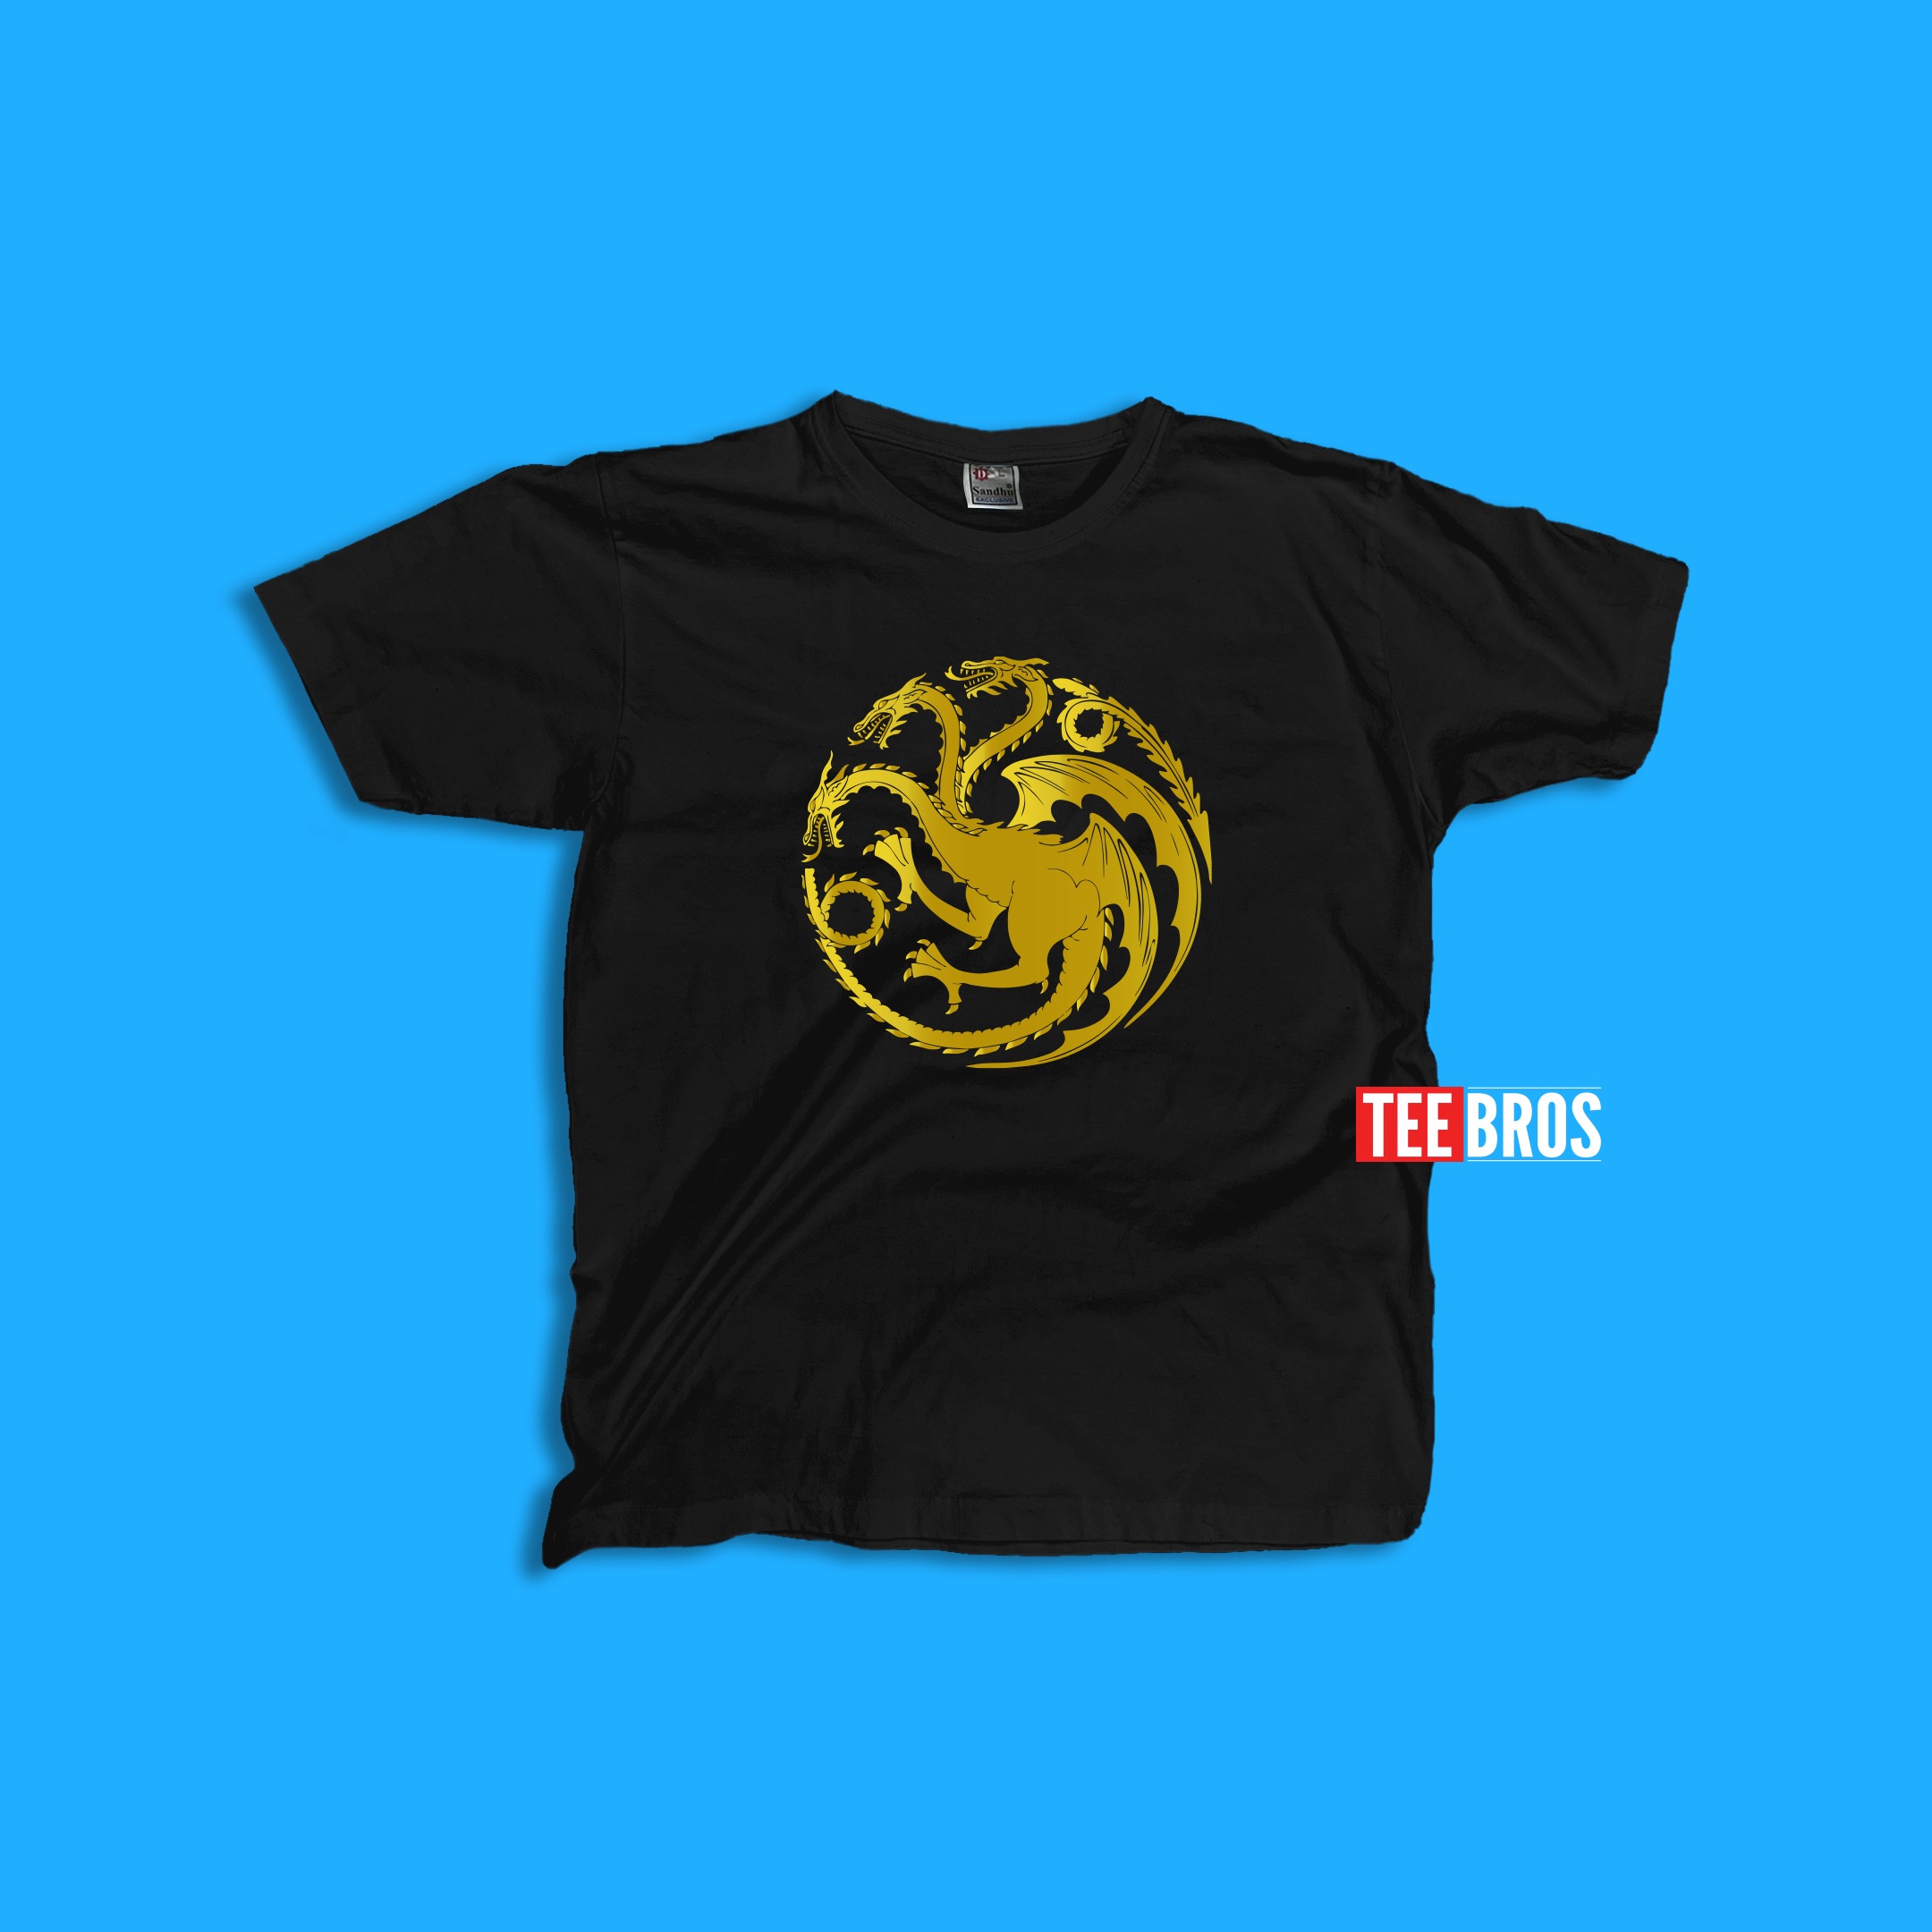 House of the Dragon T-Shirt